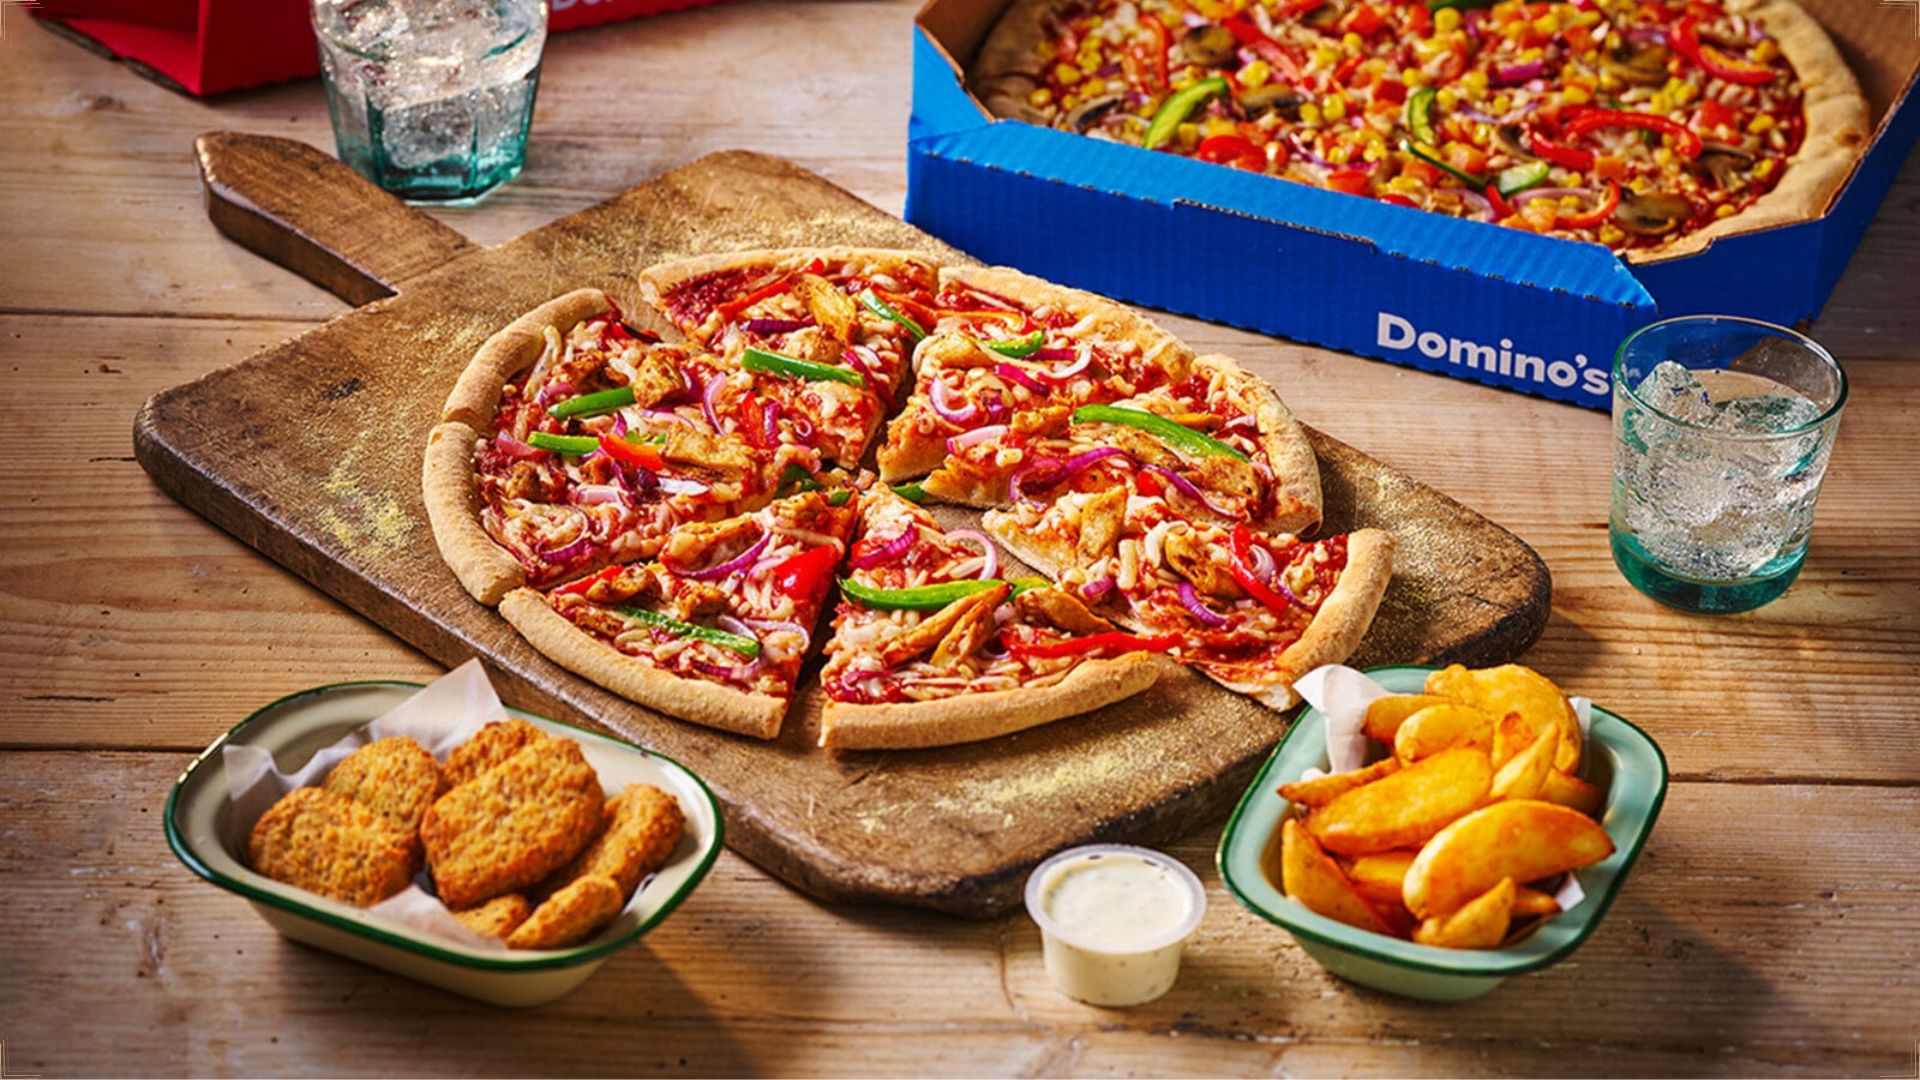 How Many Calories In A Domino's Pizza